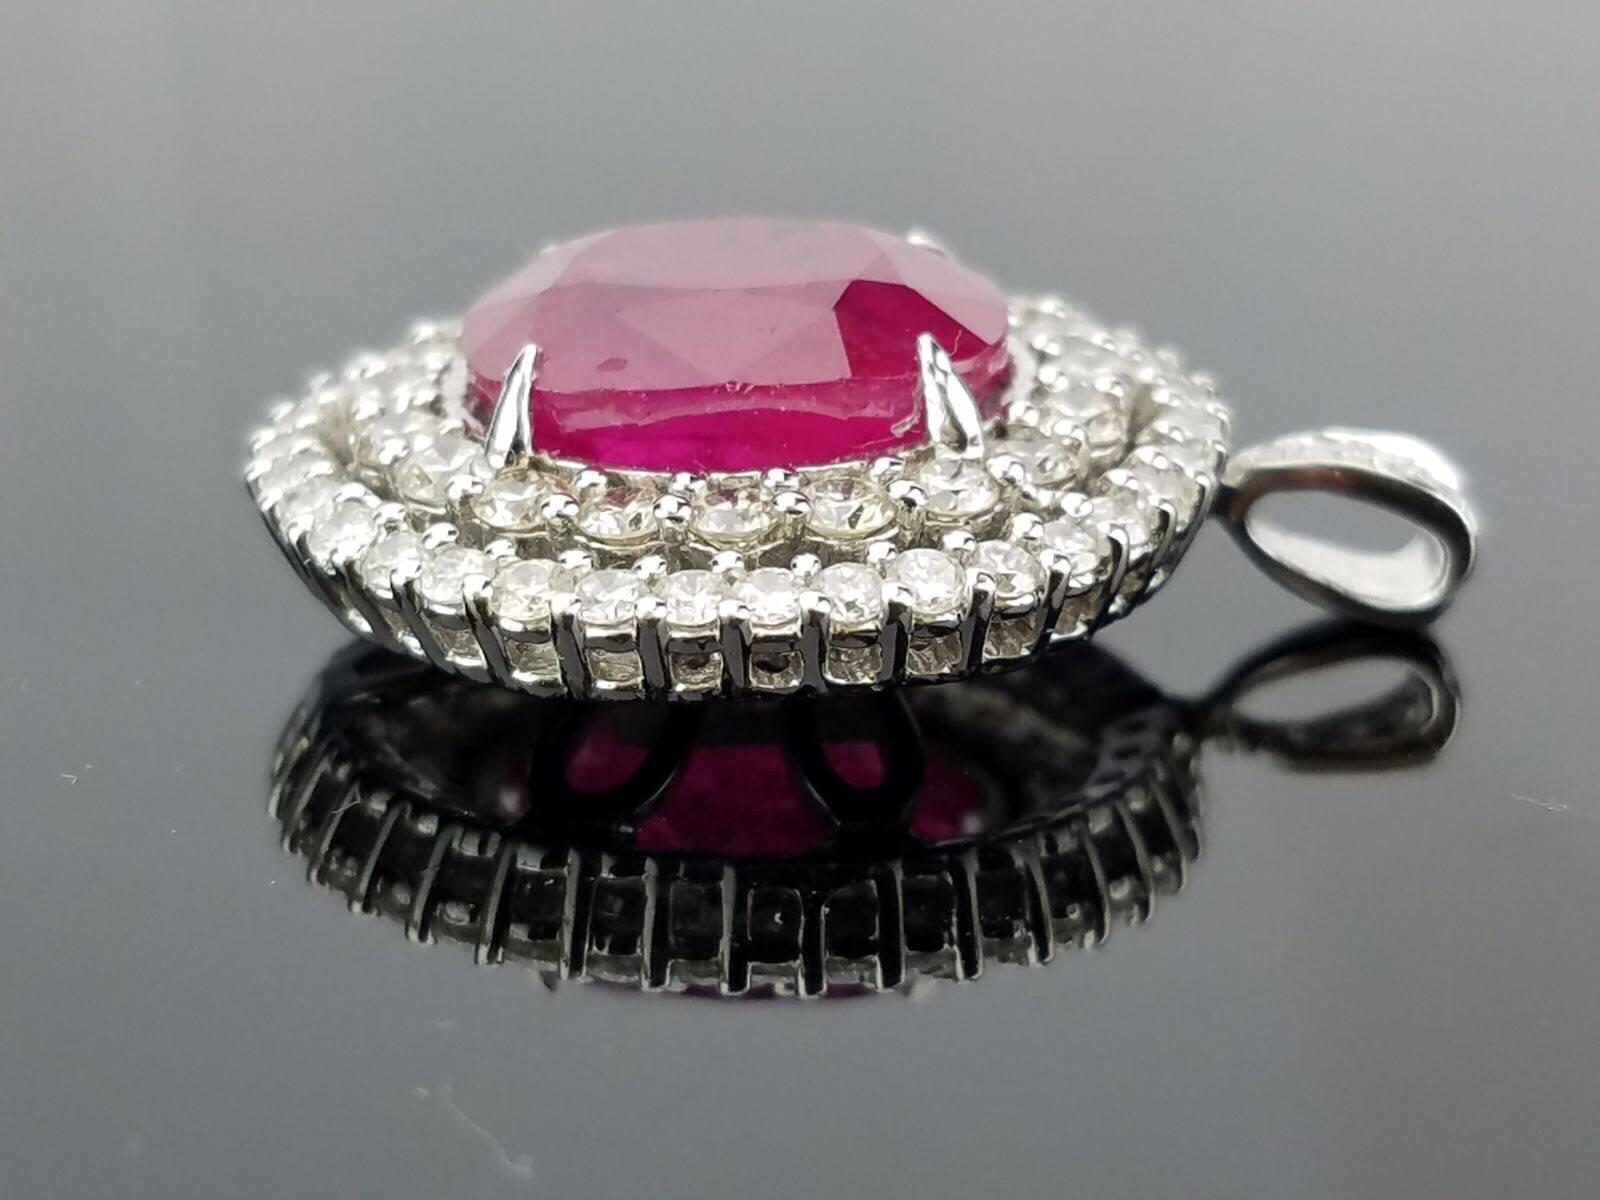 Classic oval cut African Ruby pendant, ornamented with brilliant cut white Diamonds, all set in 18K white Gold.

Can provide certificate upon request.  
Can provide cleaning/re-polish service before shipping, upon request.